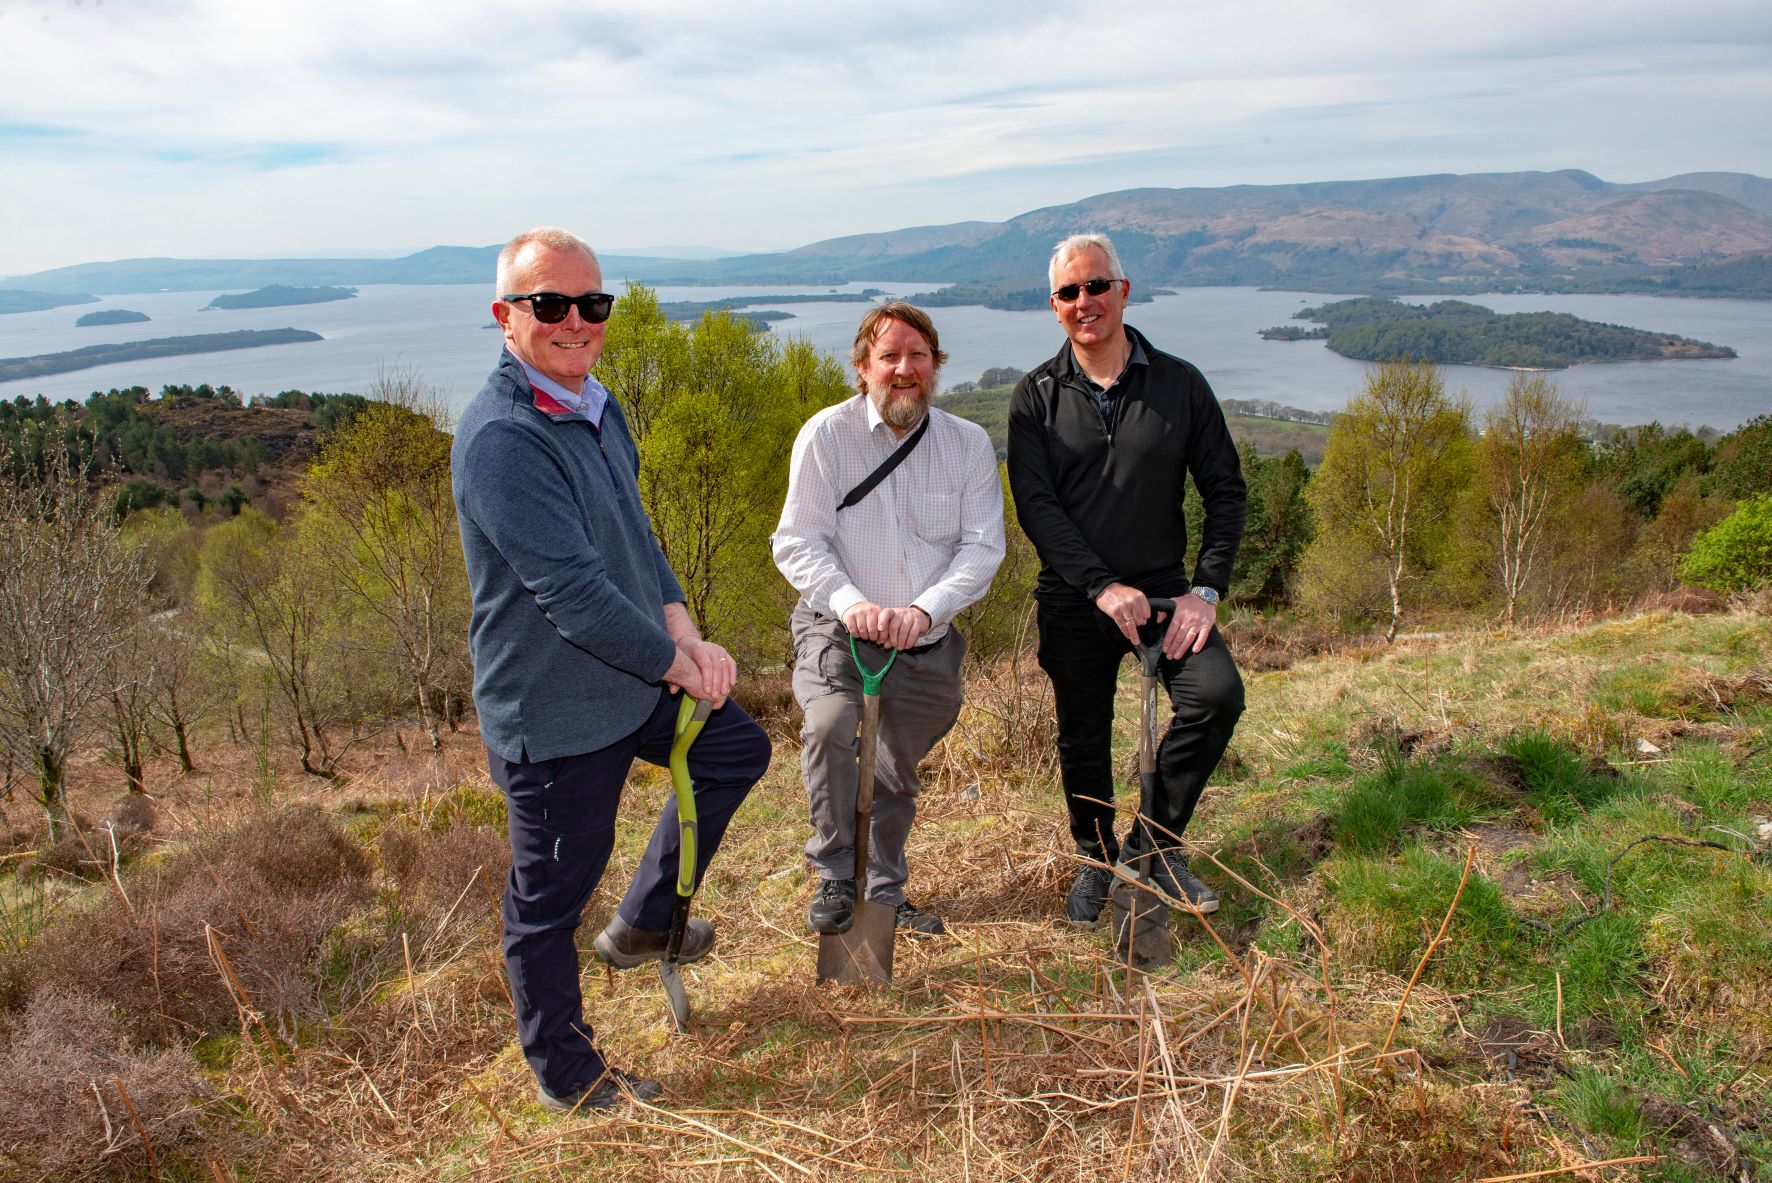 DM Hall plants 125 trees in Cashel Forest to mark 125th anniversary year